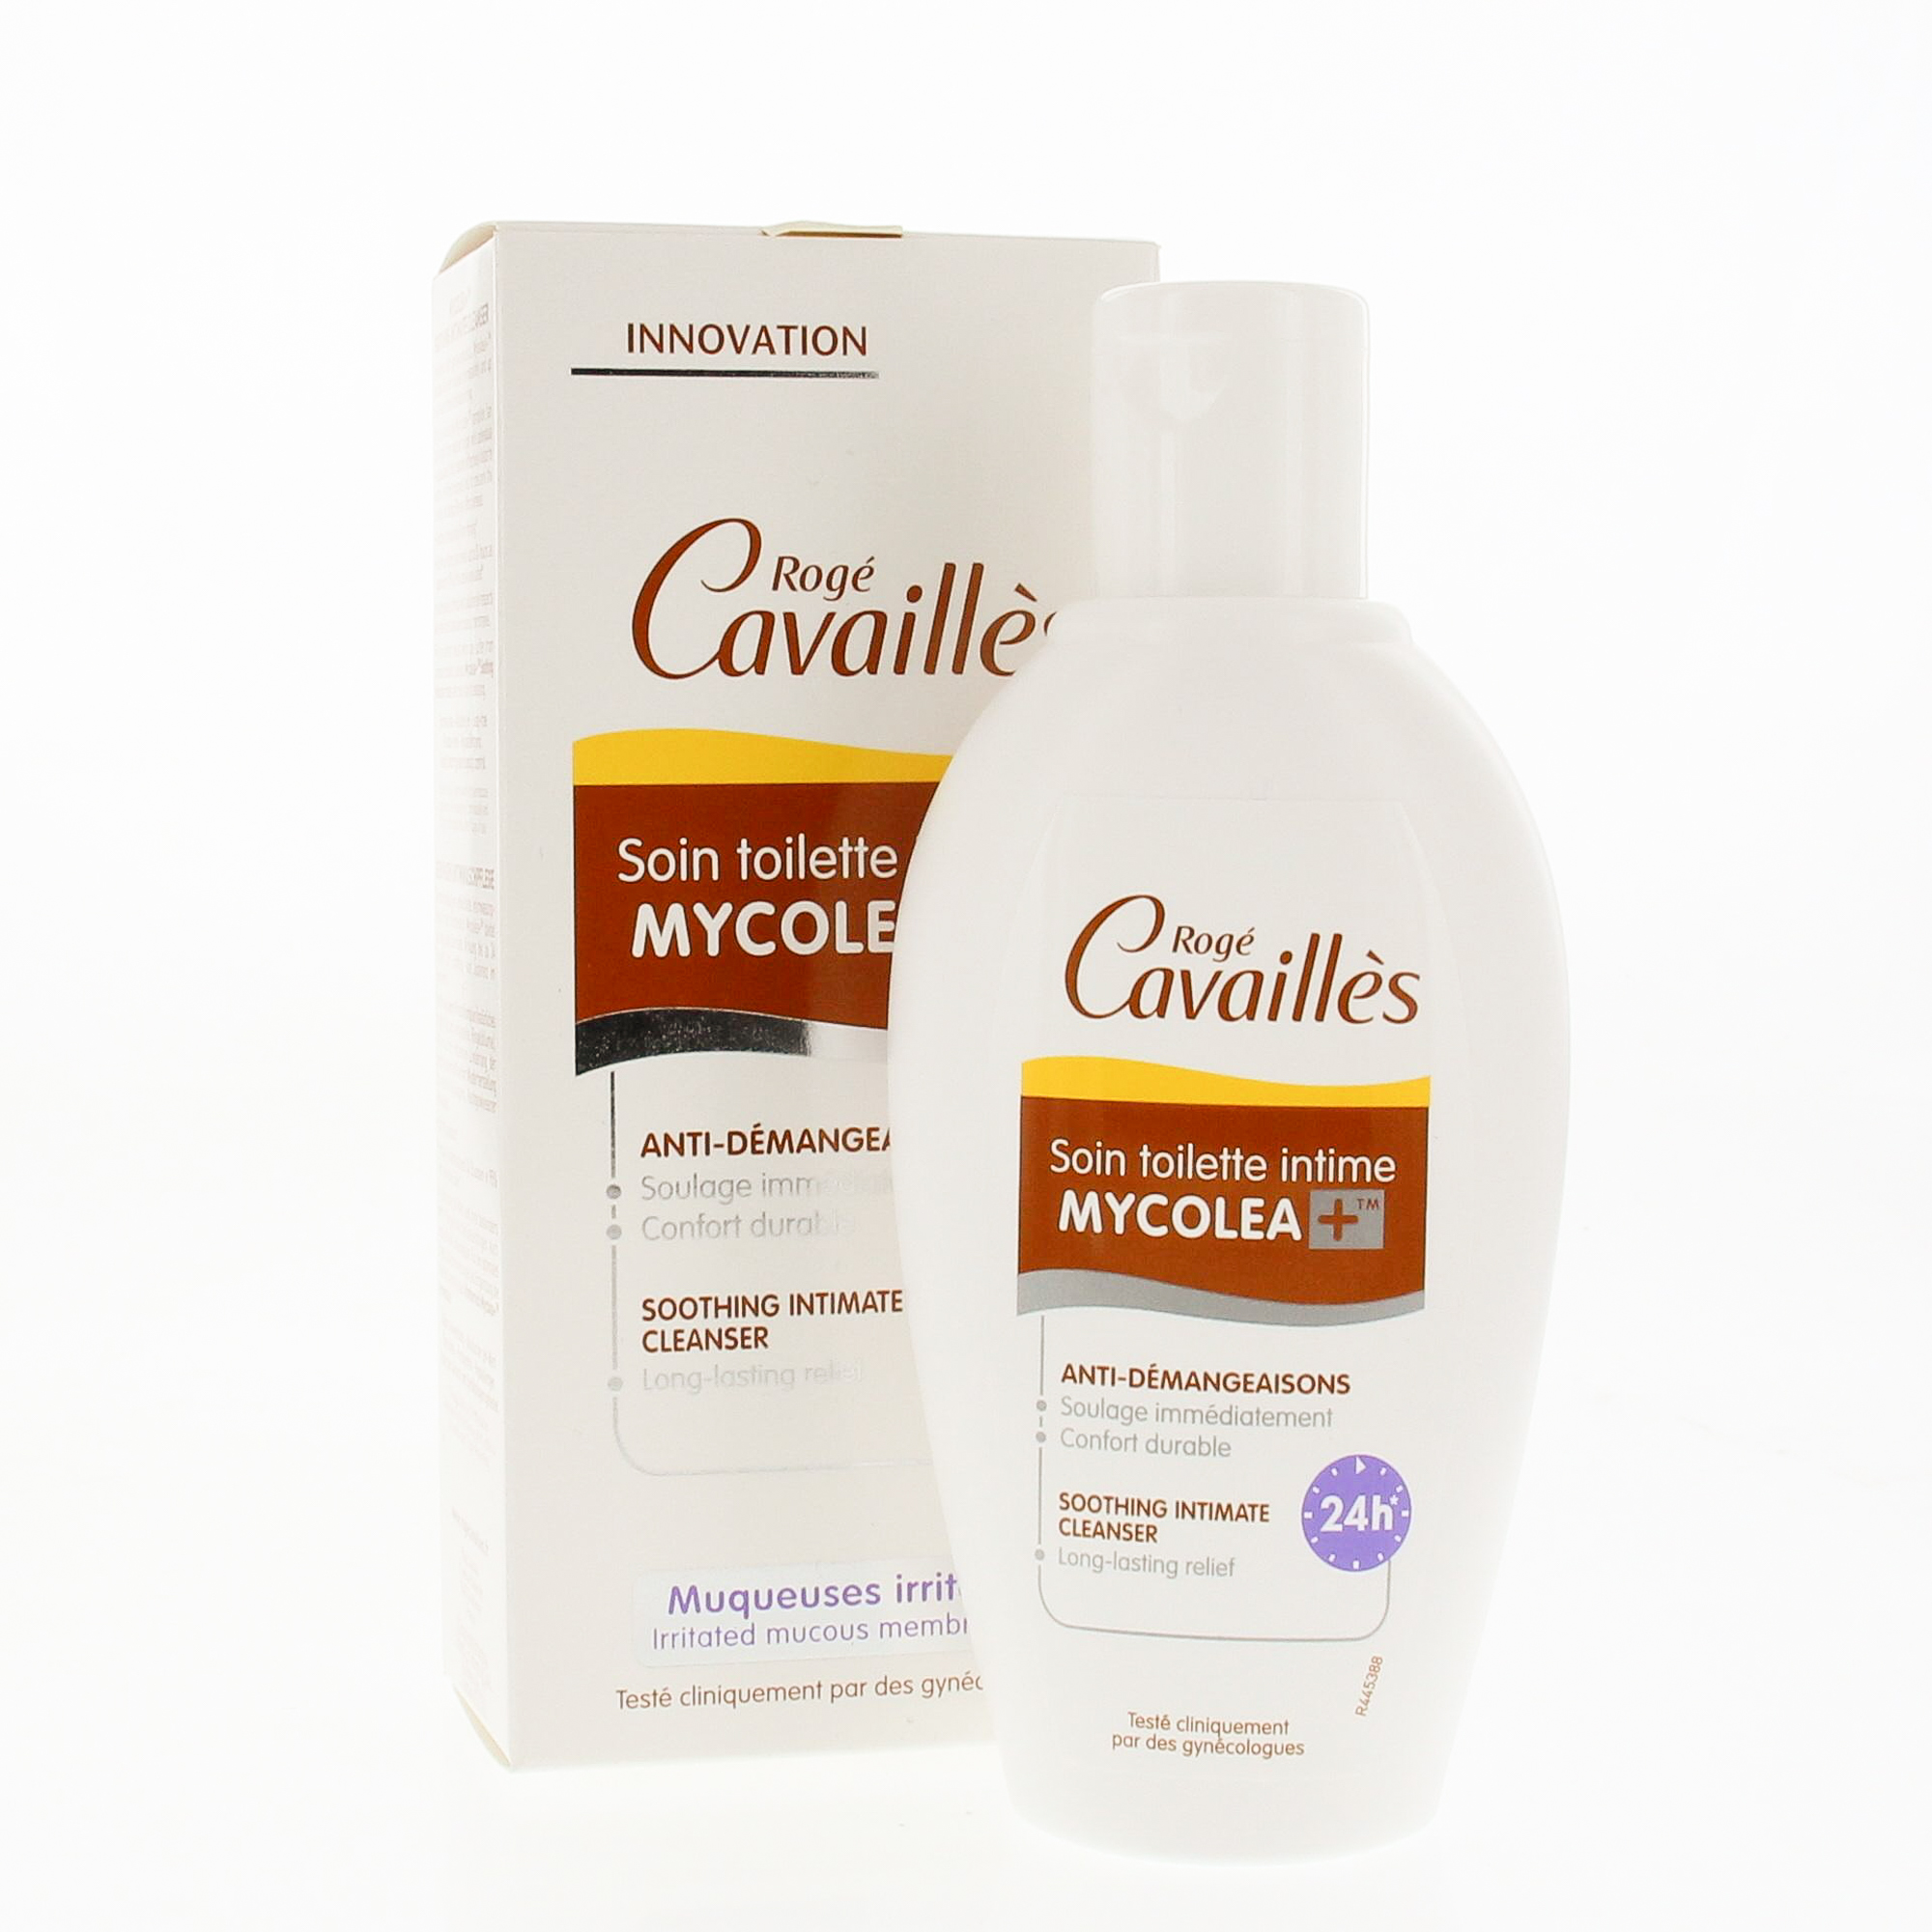 ROGÉ CAVAILLÈS Soothing Intimate Cleanser – MYCOLEA+